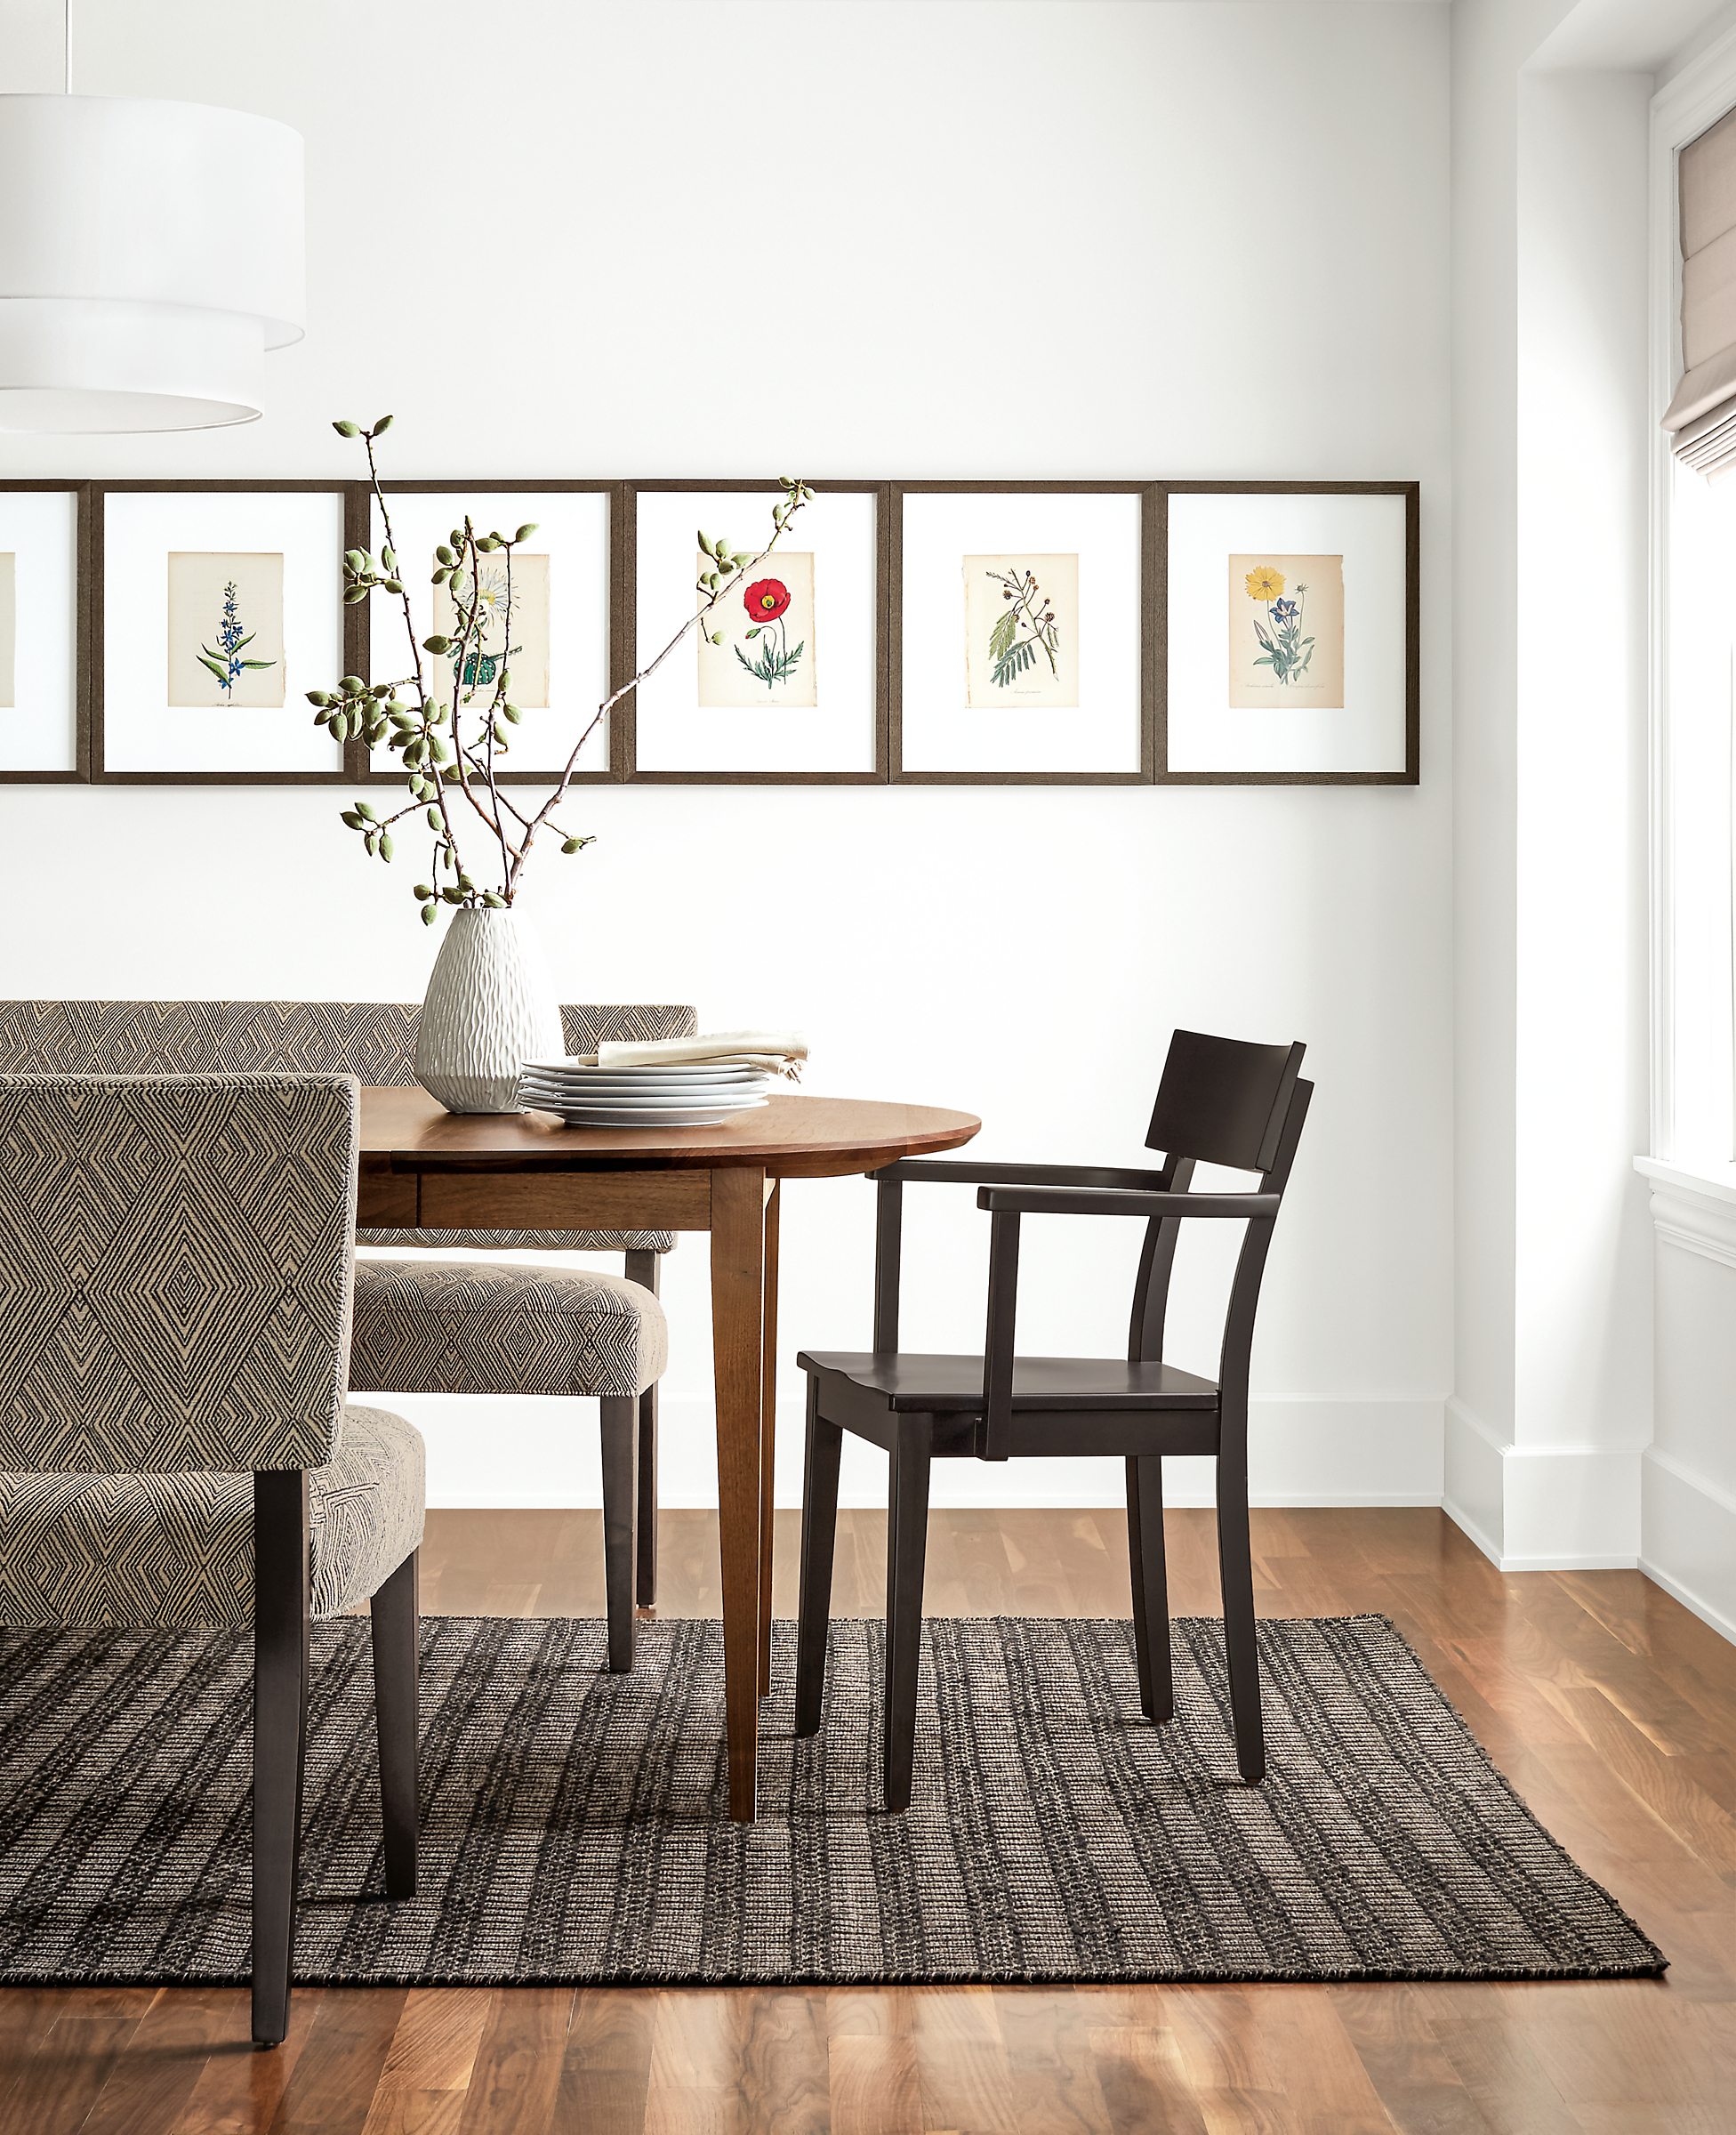 Detail view of six Botanical framed prints in dining room.